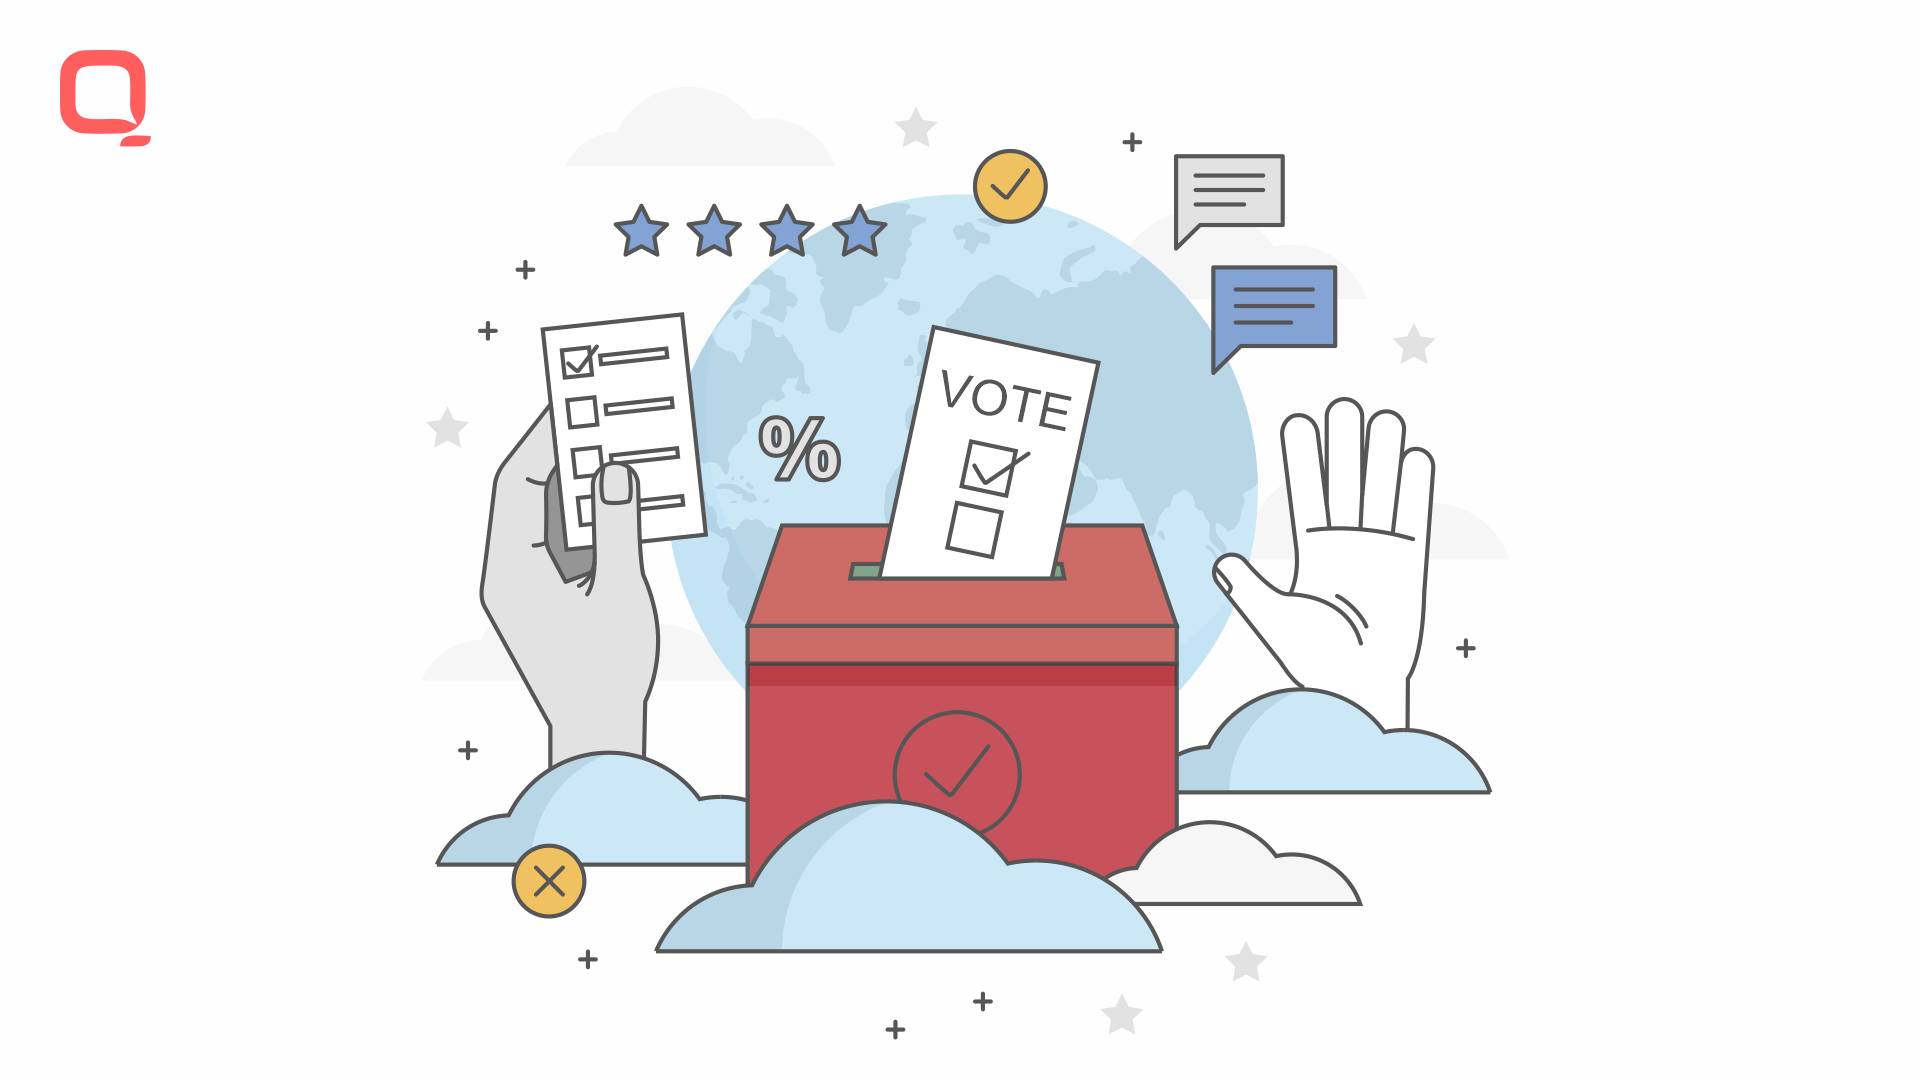 Bloakchain uses in election